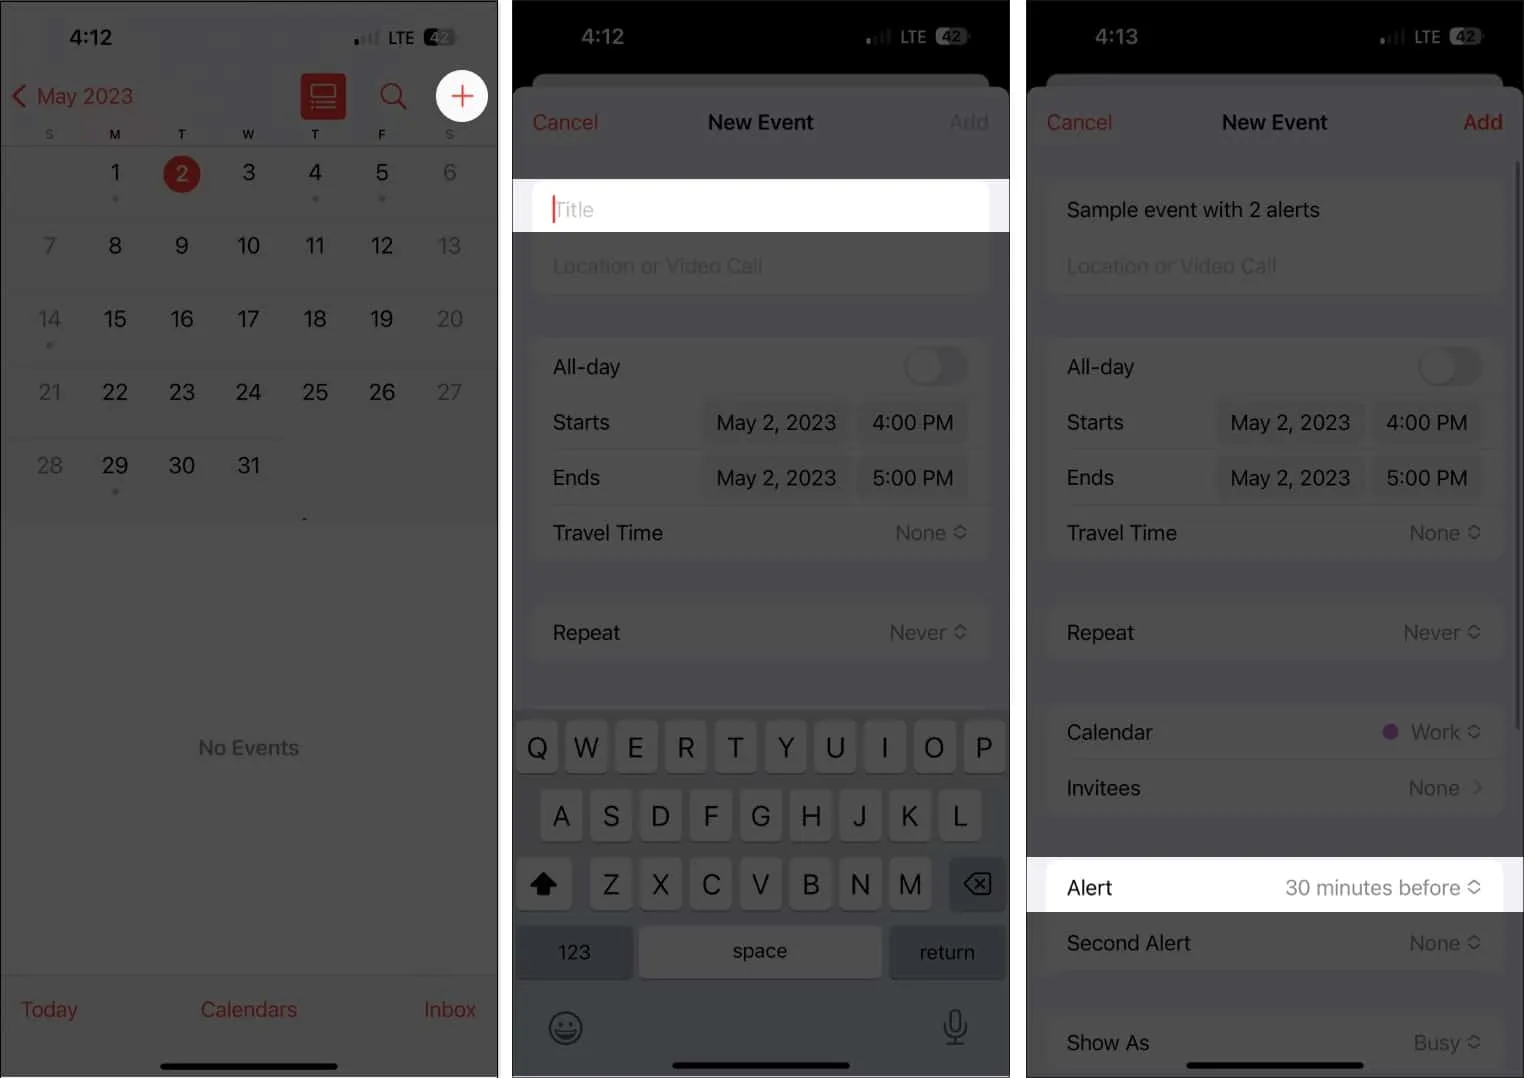 Tap + icon, enter the title, navigate to alert option in calendars app